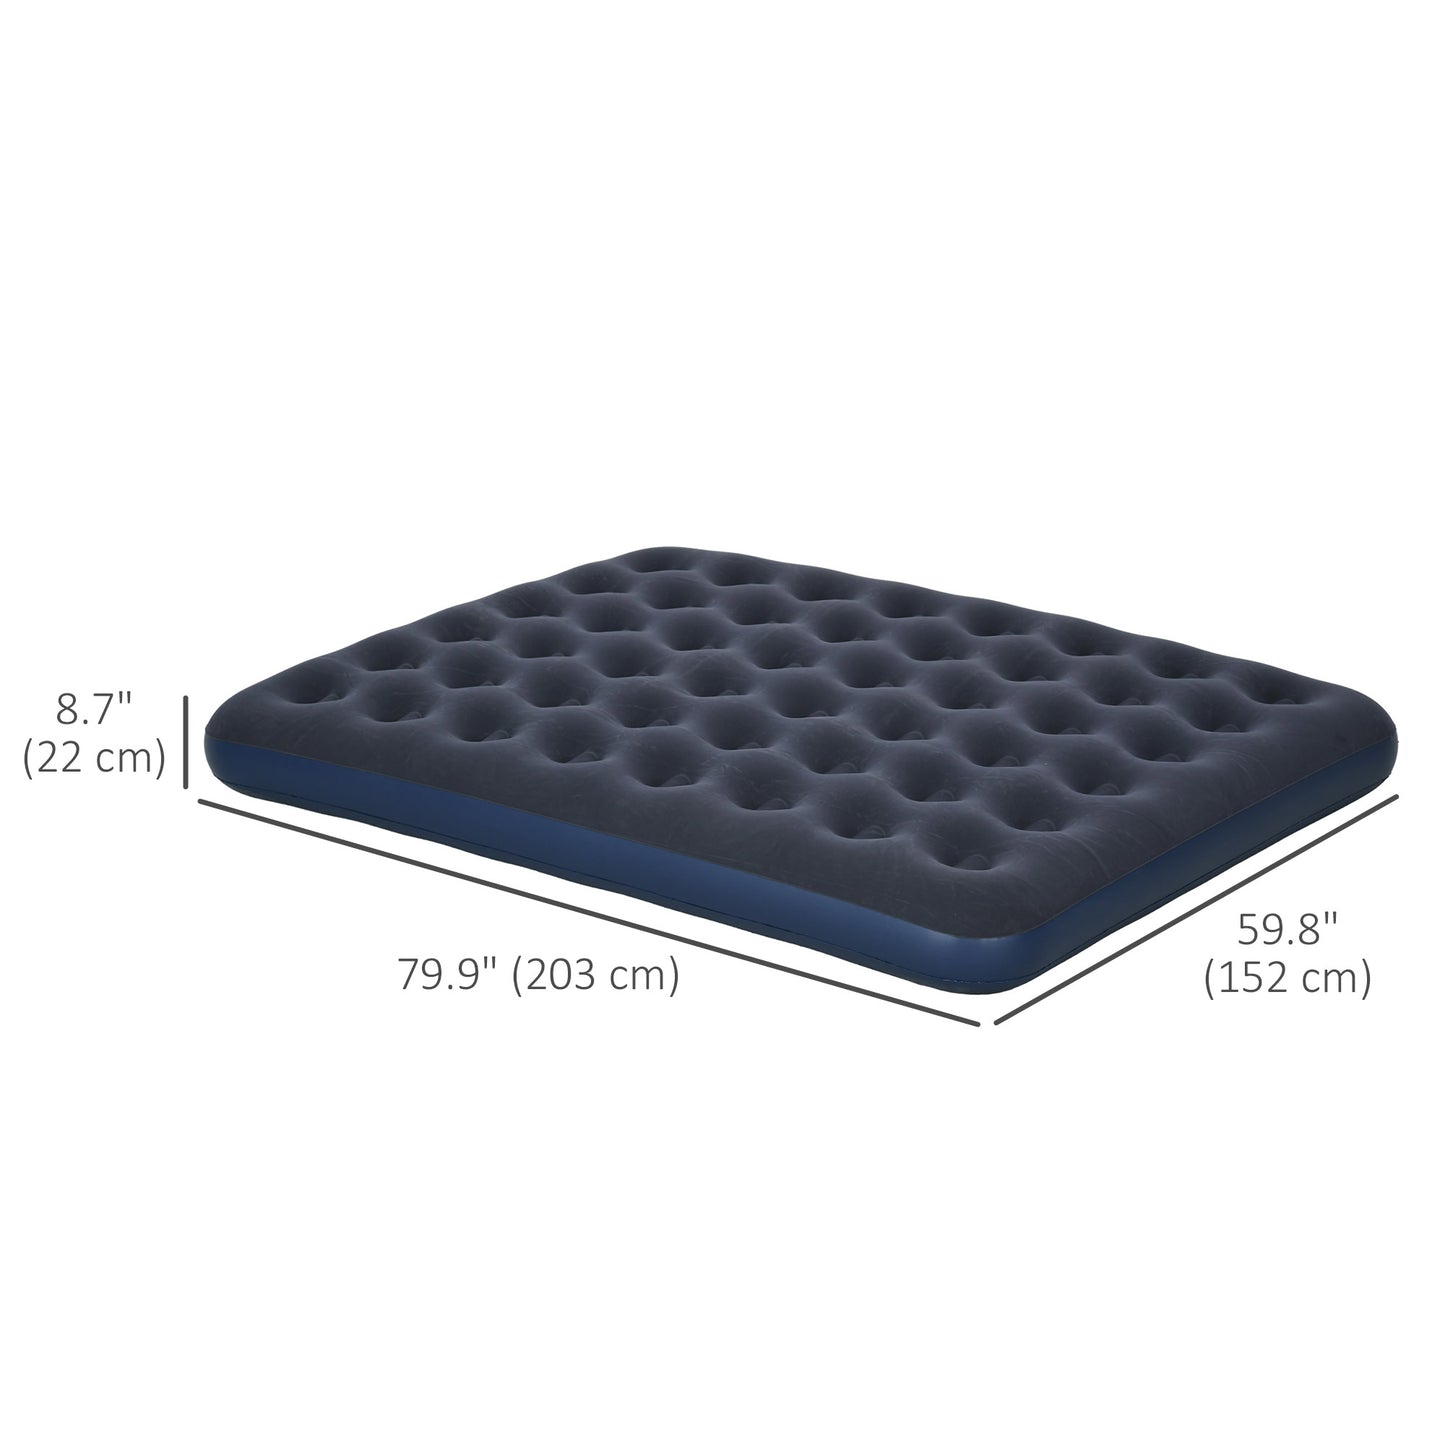 Air Mattress Queen, Inflatable Air Bed with Flocked Surface for Guest, Camping, Travel, Dark Blue at Gallery Canada